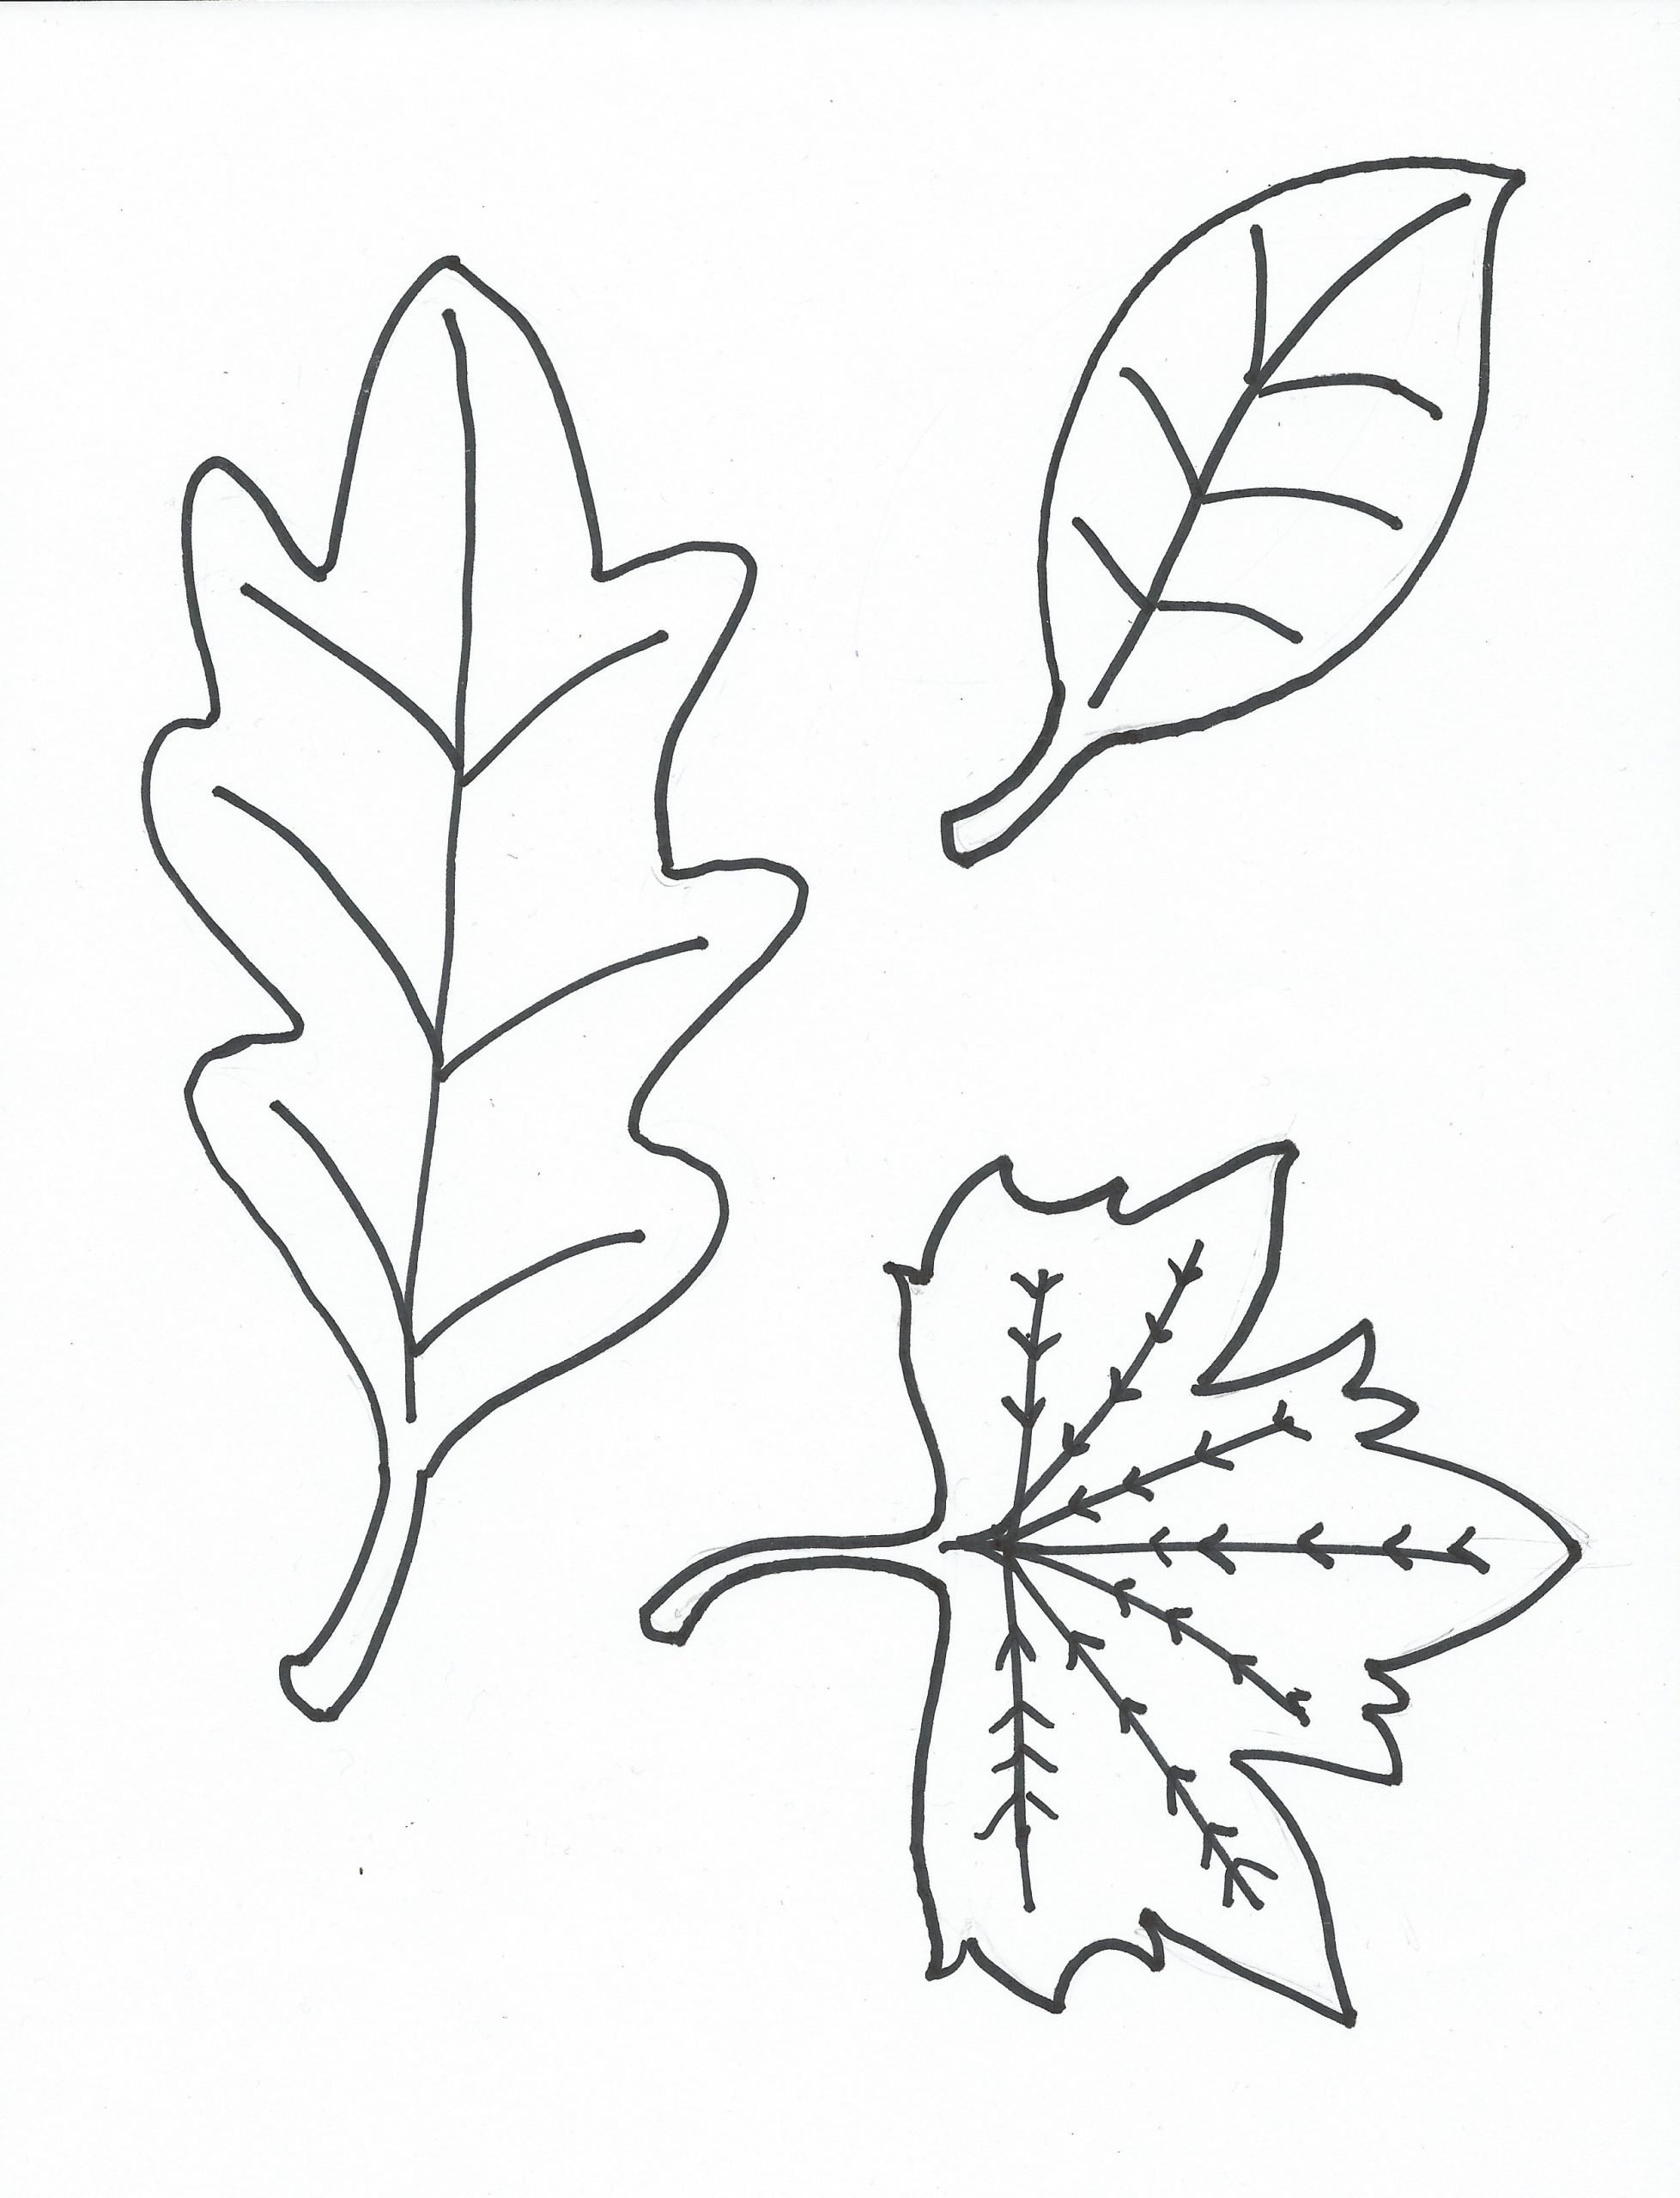 Printable Leaves Coloring Pages
 Printable Coloring Pages Free Samples & Free Stuff